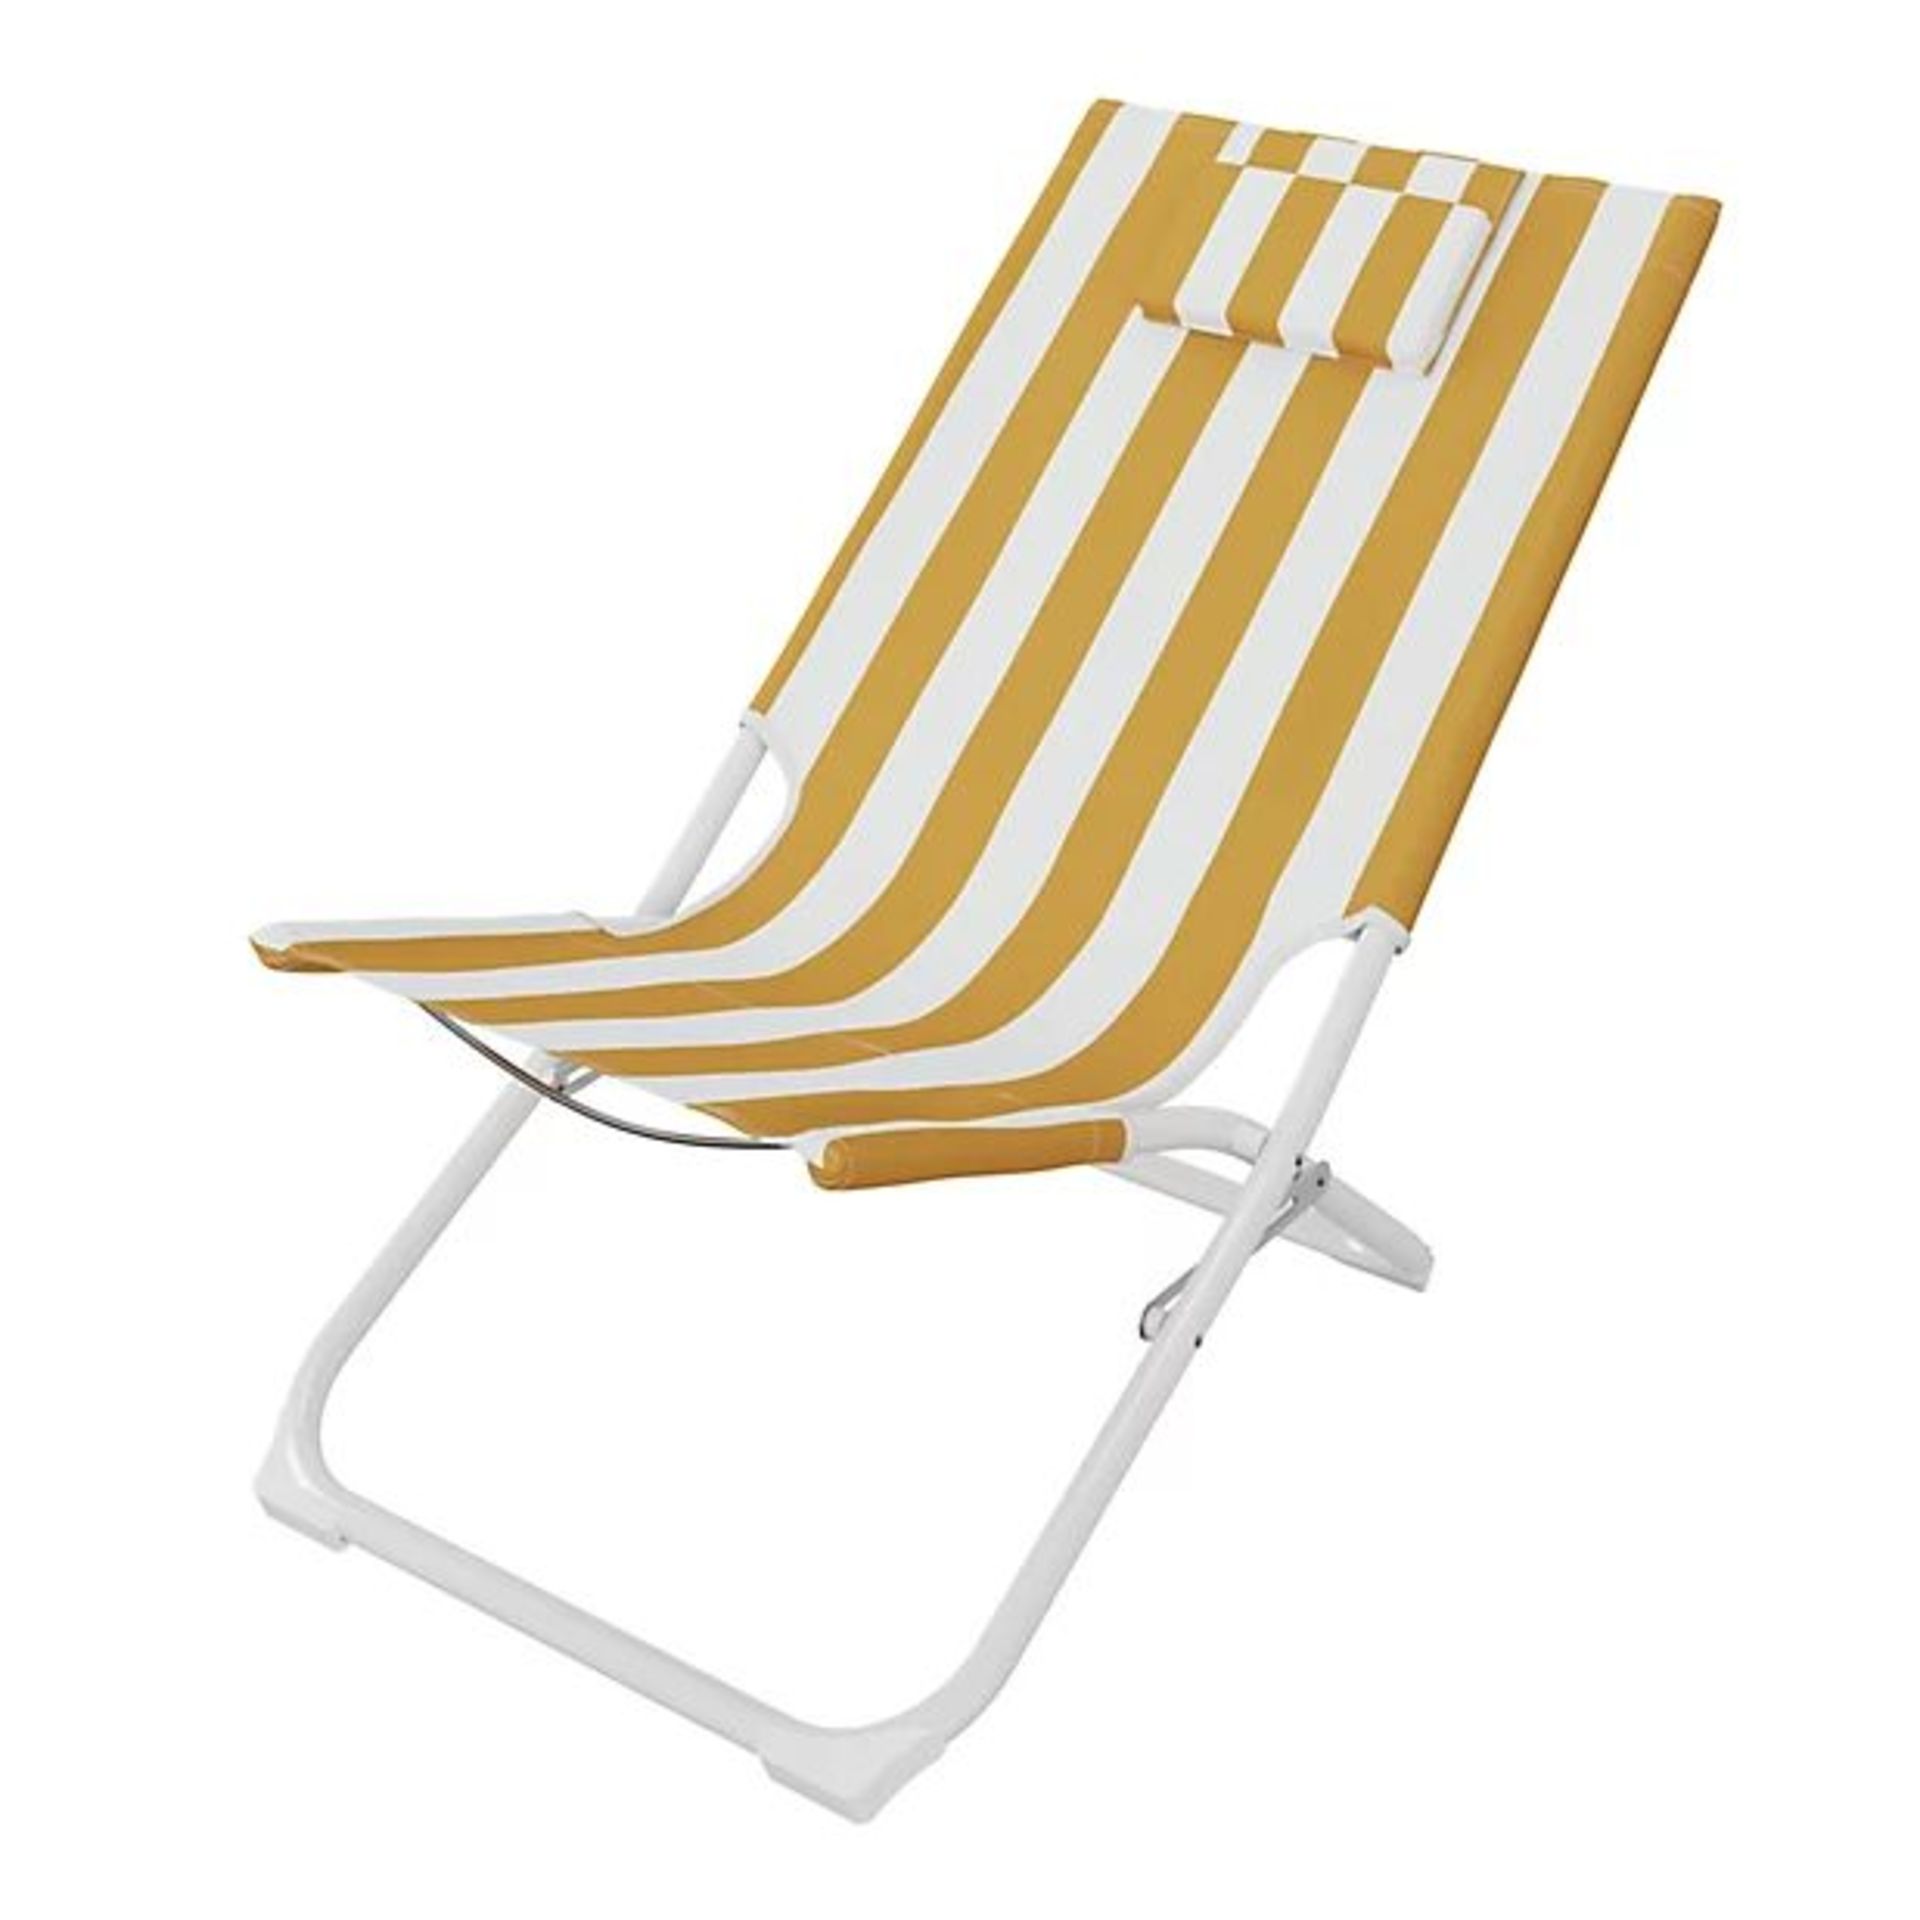 4 X BRAND NEW CARACOU DECK CHAIRS R13-2